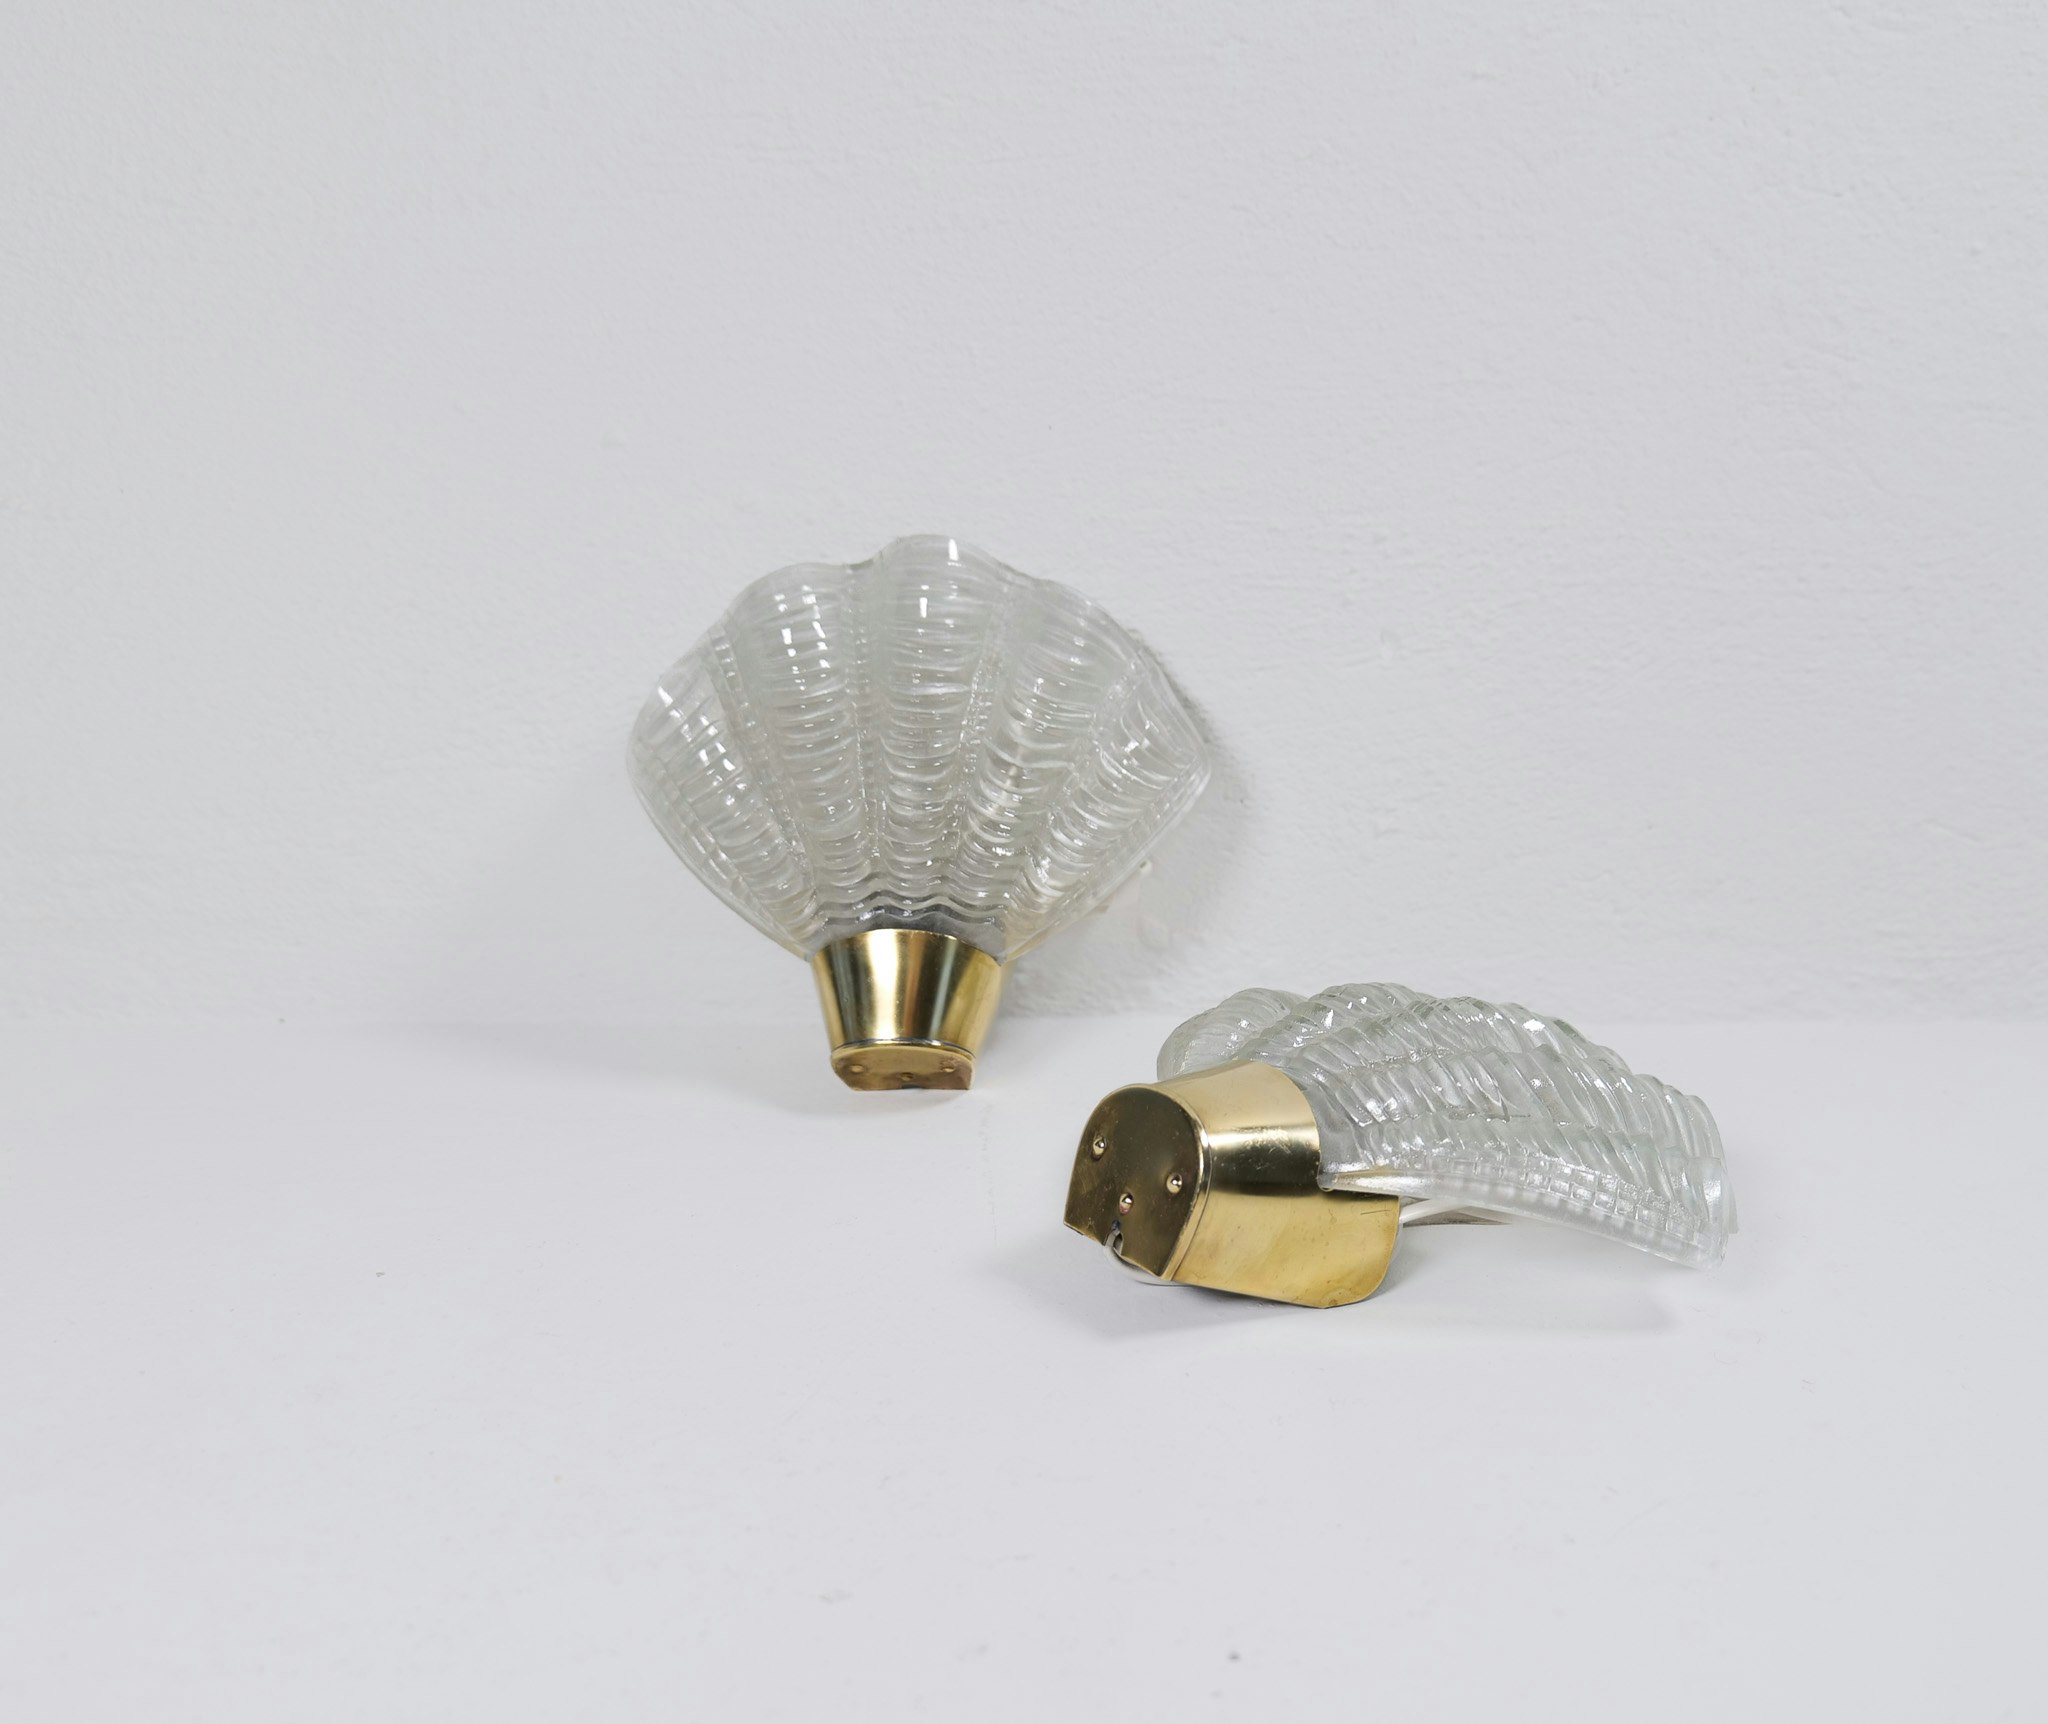 Midcentury Moder Pair of ASEA Wall Lights, "Coquille", 1950s, Sweden